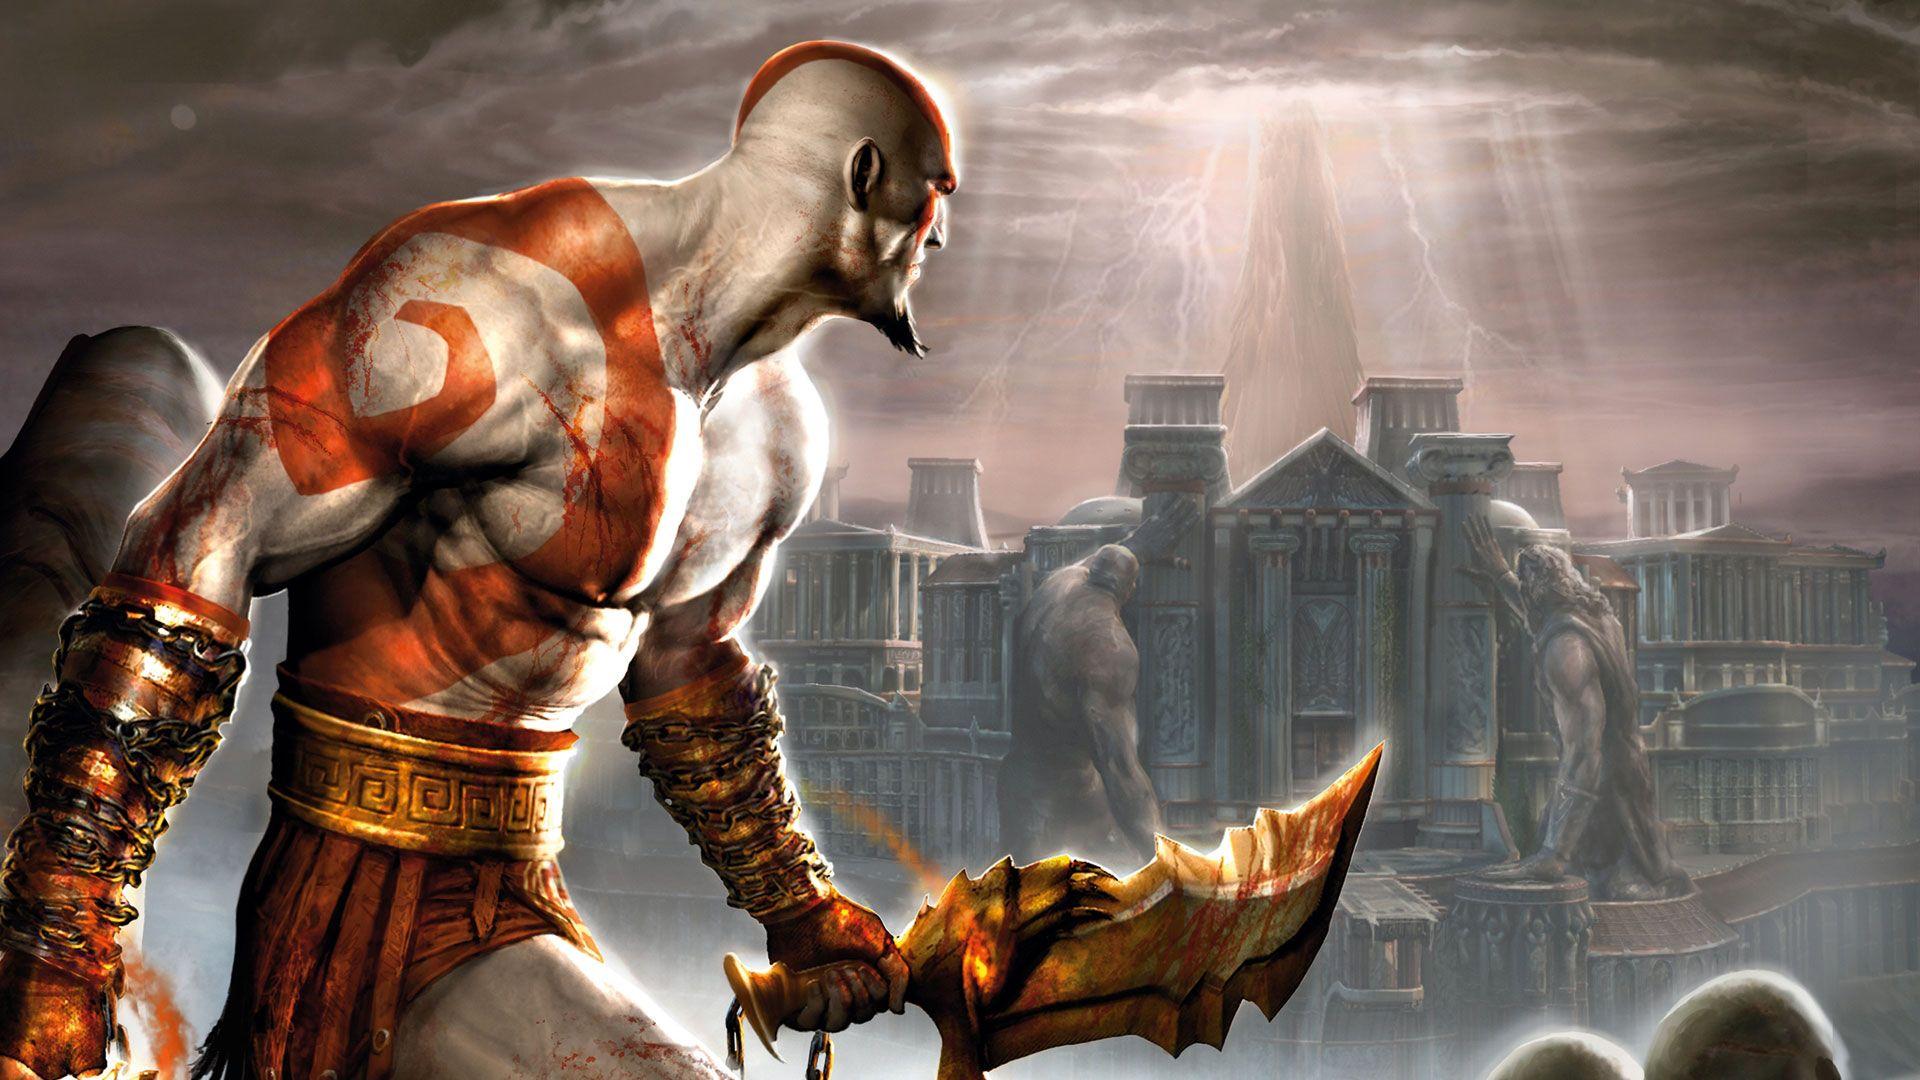 God of War. God of war, Kratos god of war, God of war game